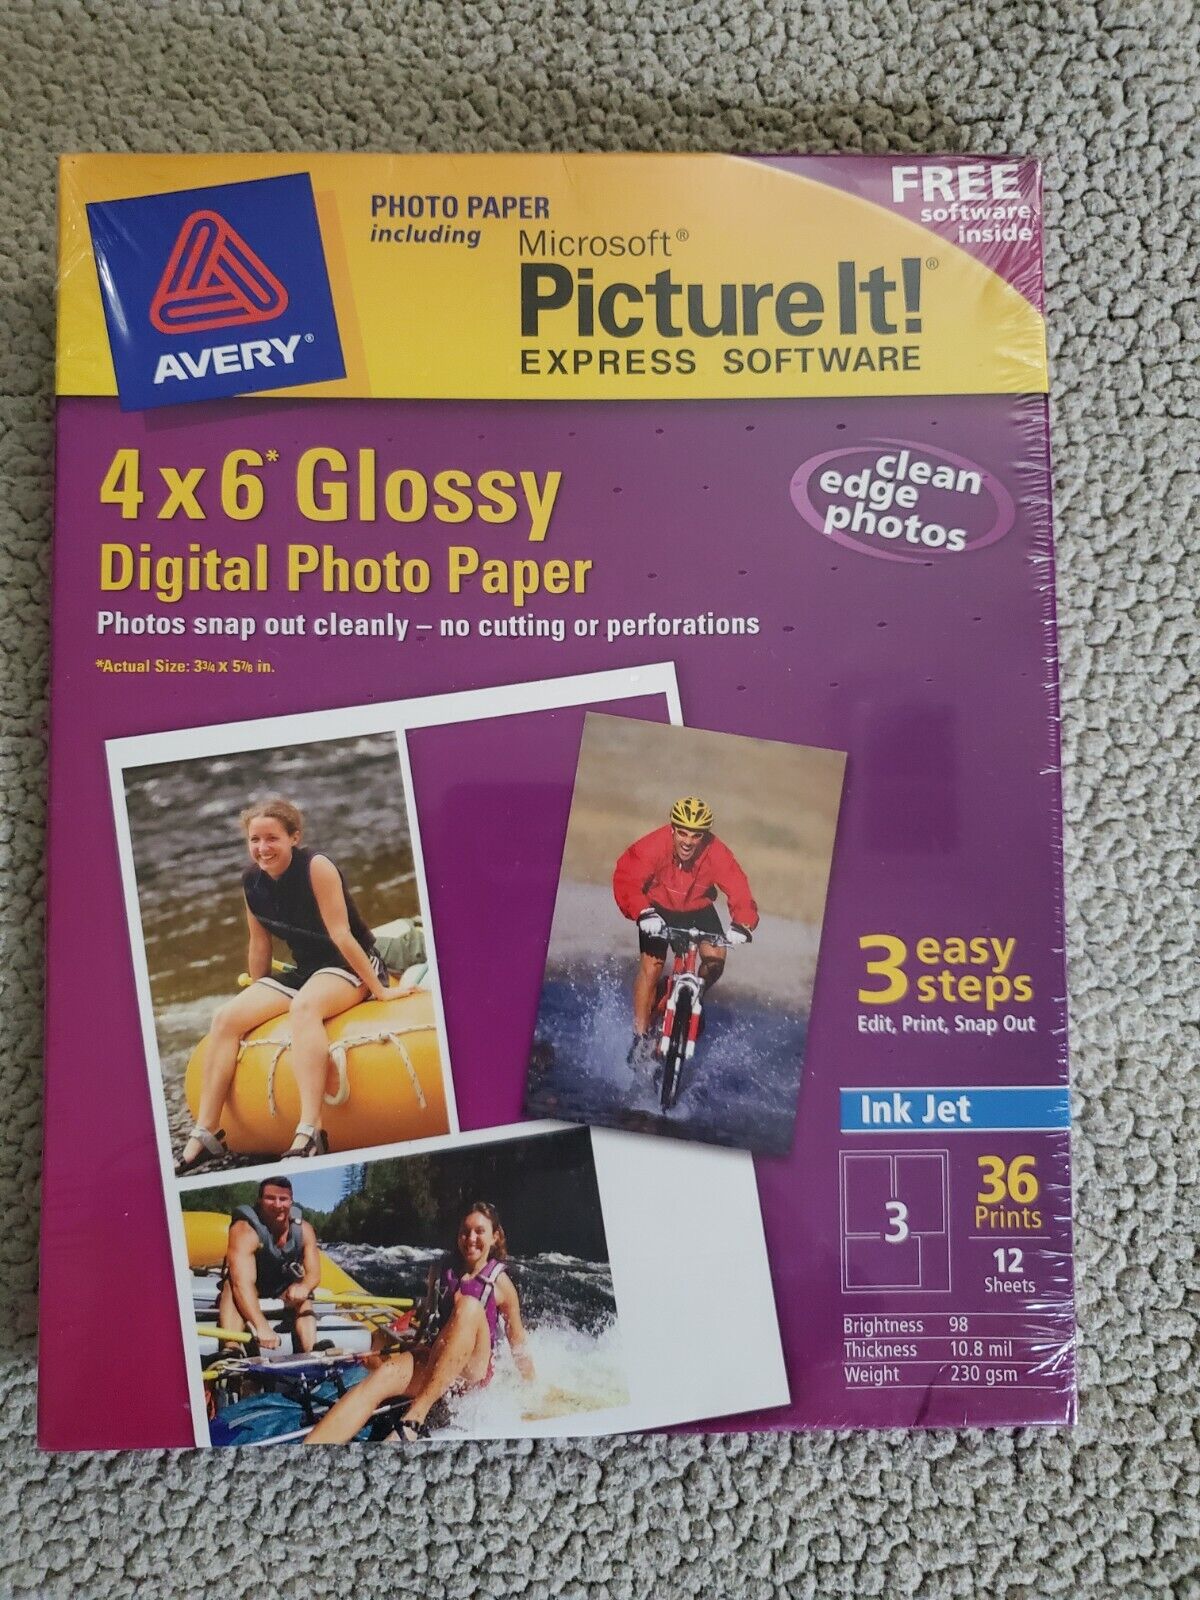 Avery Ink Jet 4 X 6 Glossy Digital Photo Paper 12 Sheets Microsoft Picture It